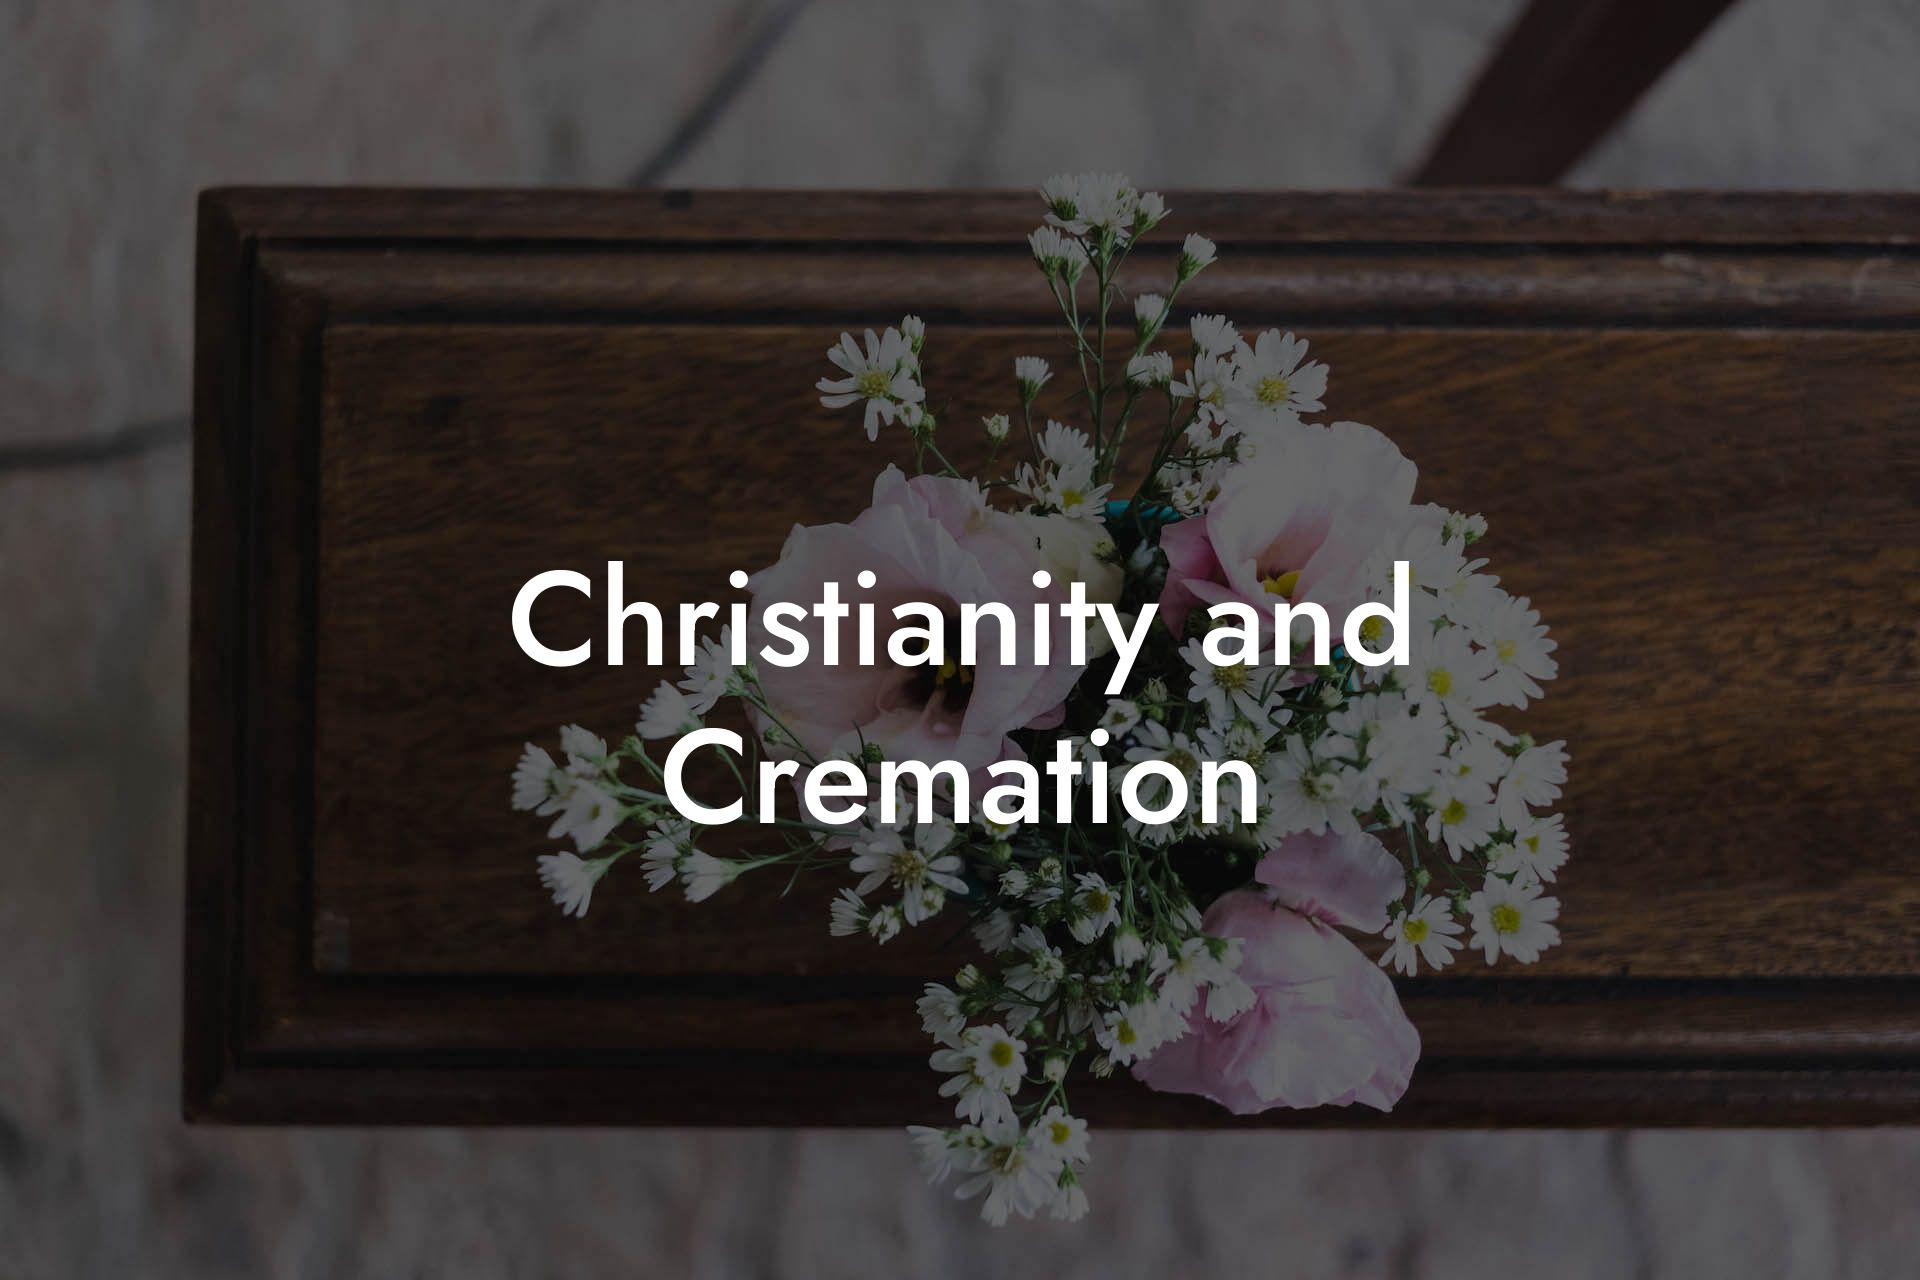 Christianity and Cremation